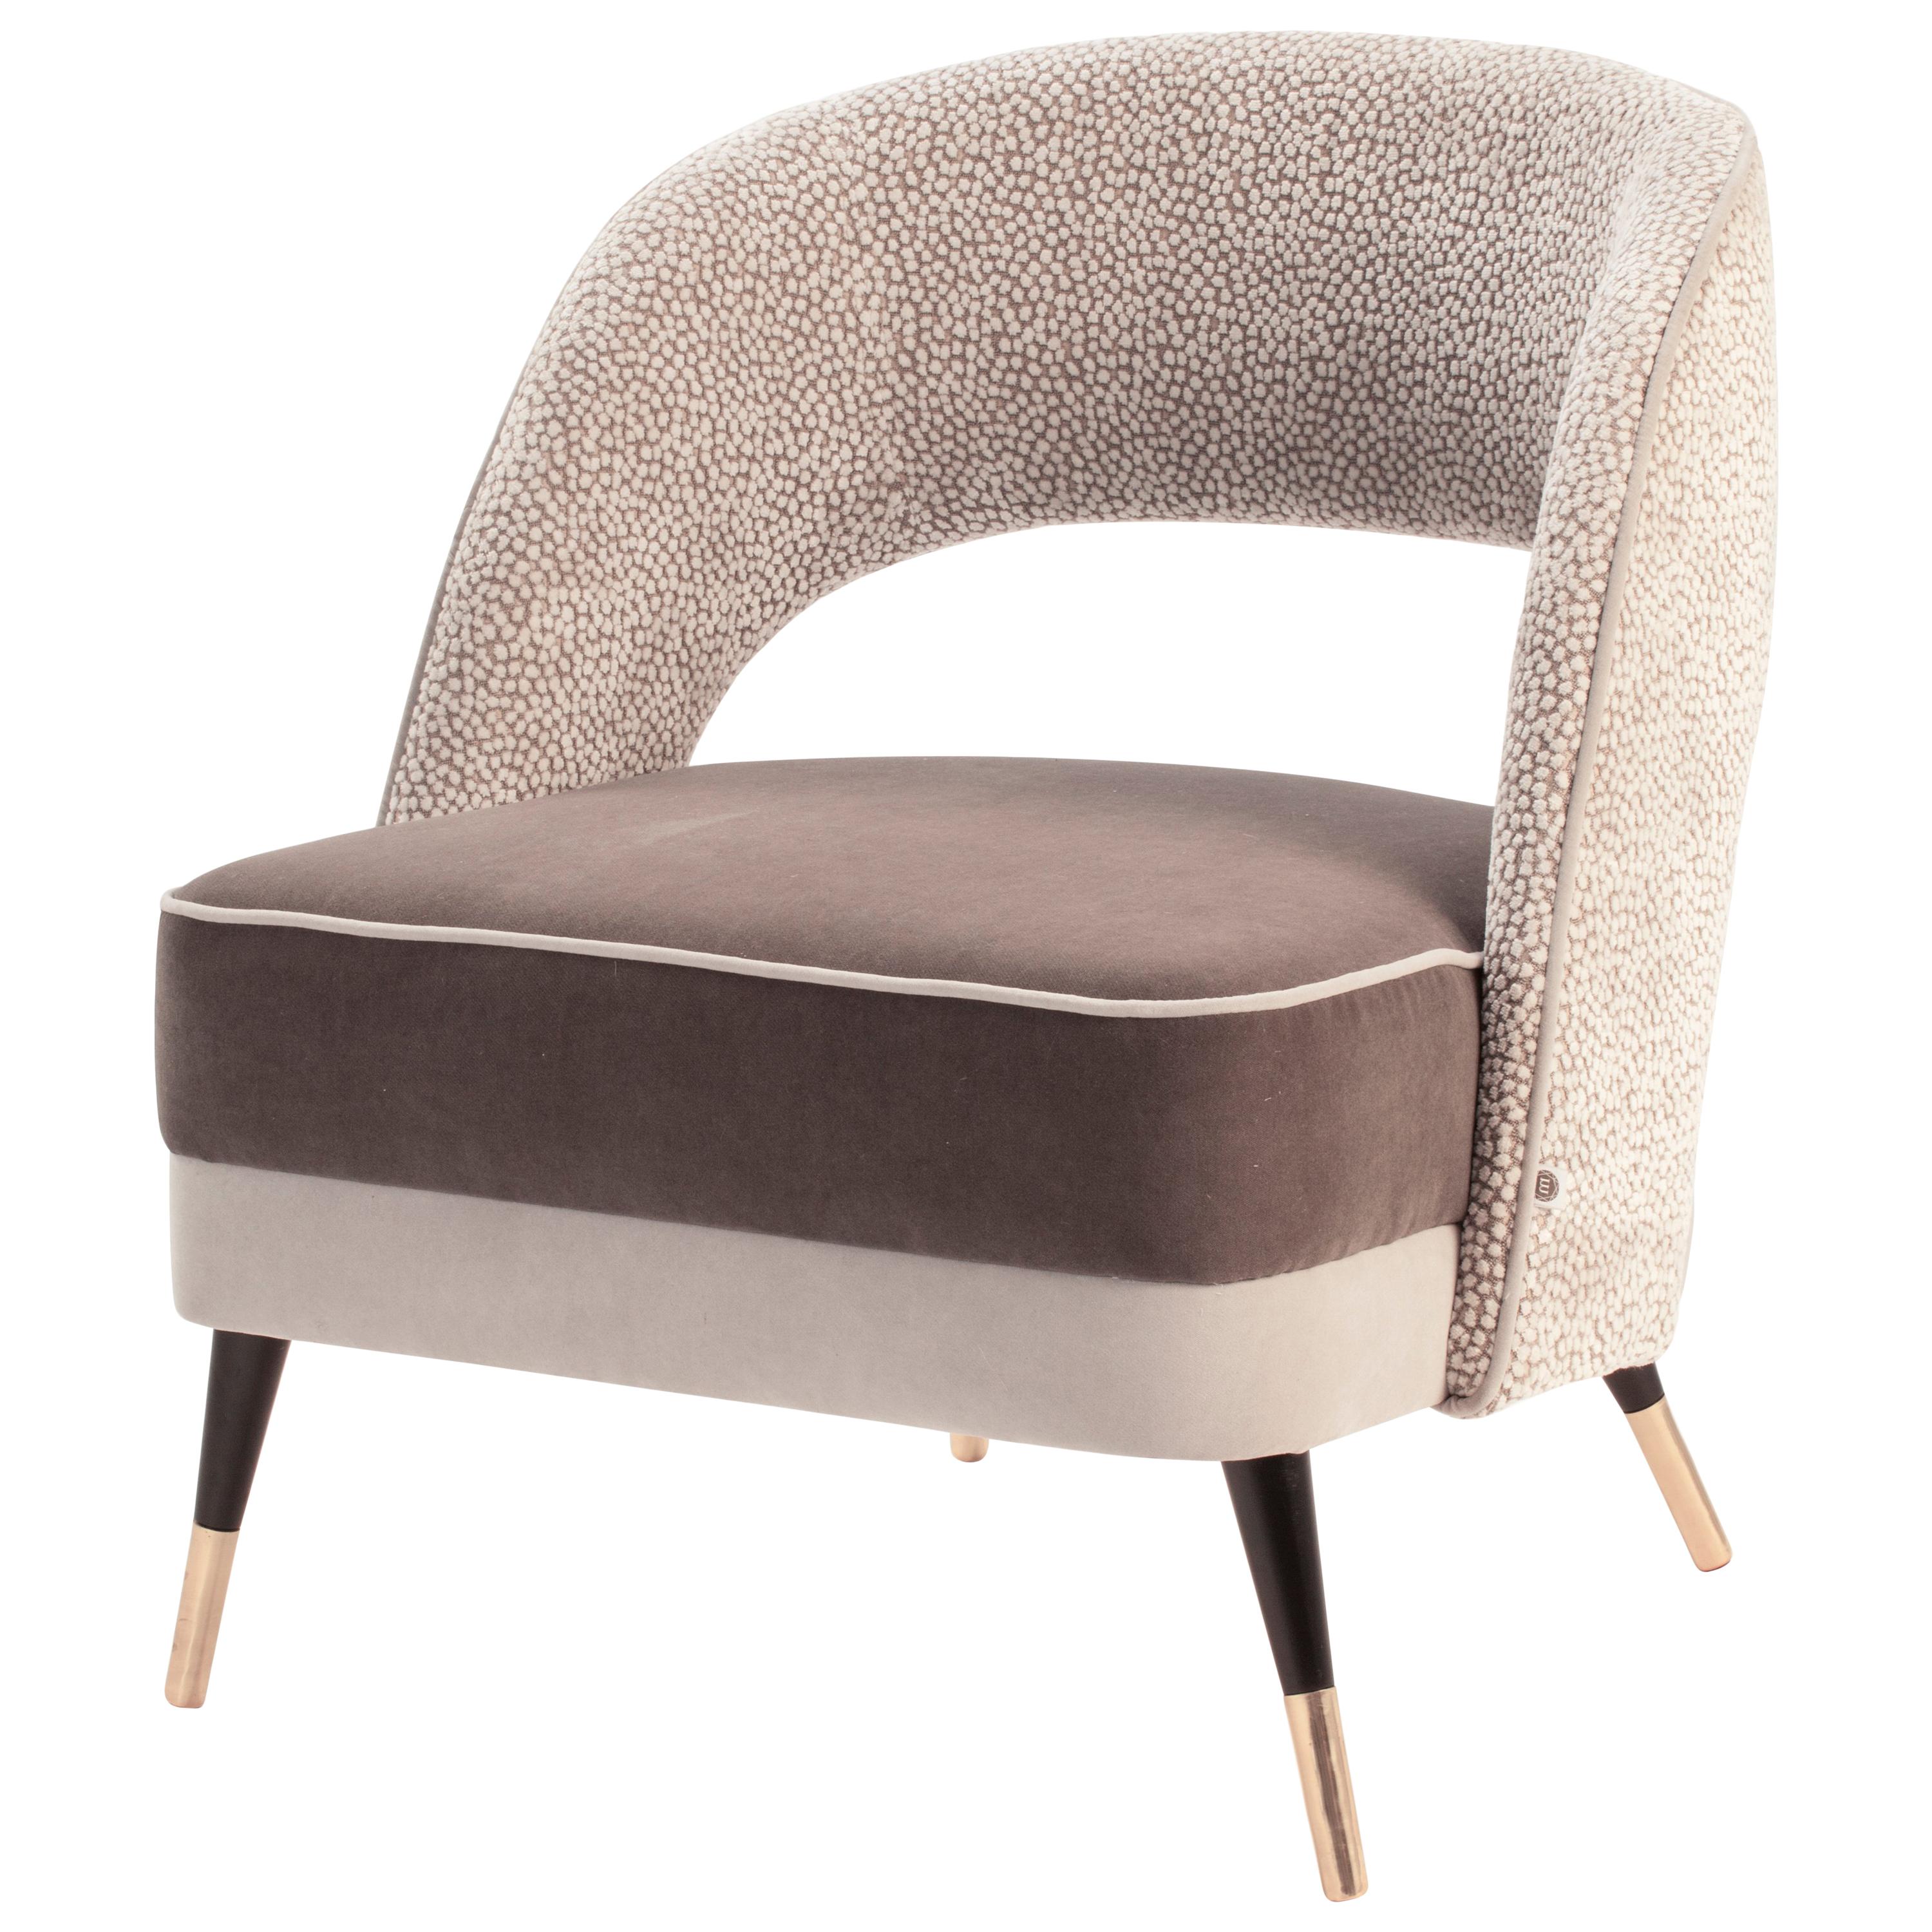 Mid-Century Modern Ava Armchair Upholstery Feet Soft Beige Seat and Textured Fabric Backrest For Sale